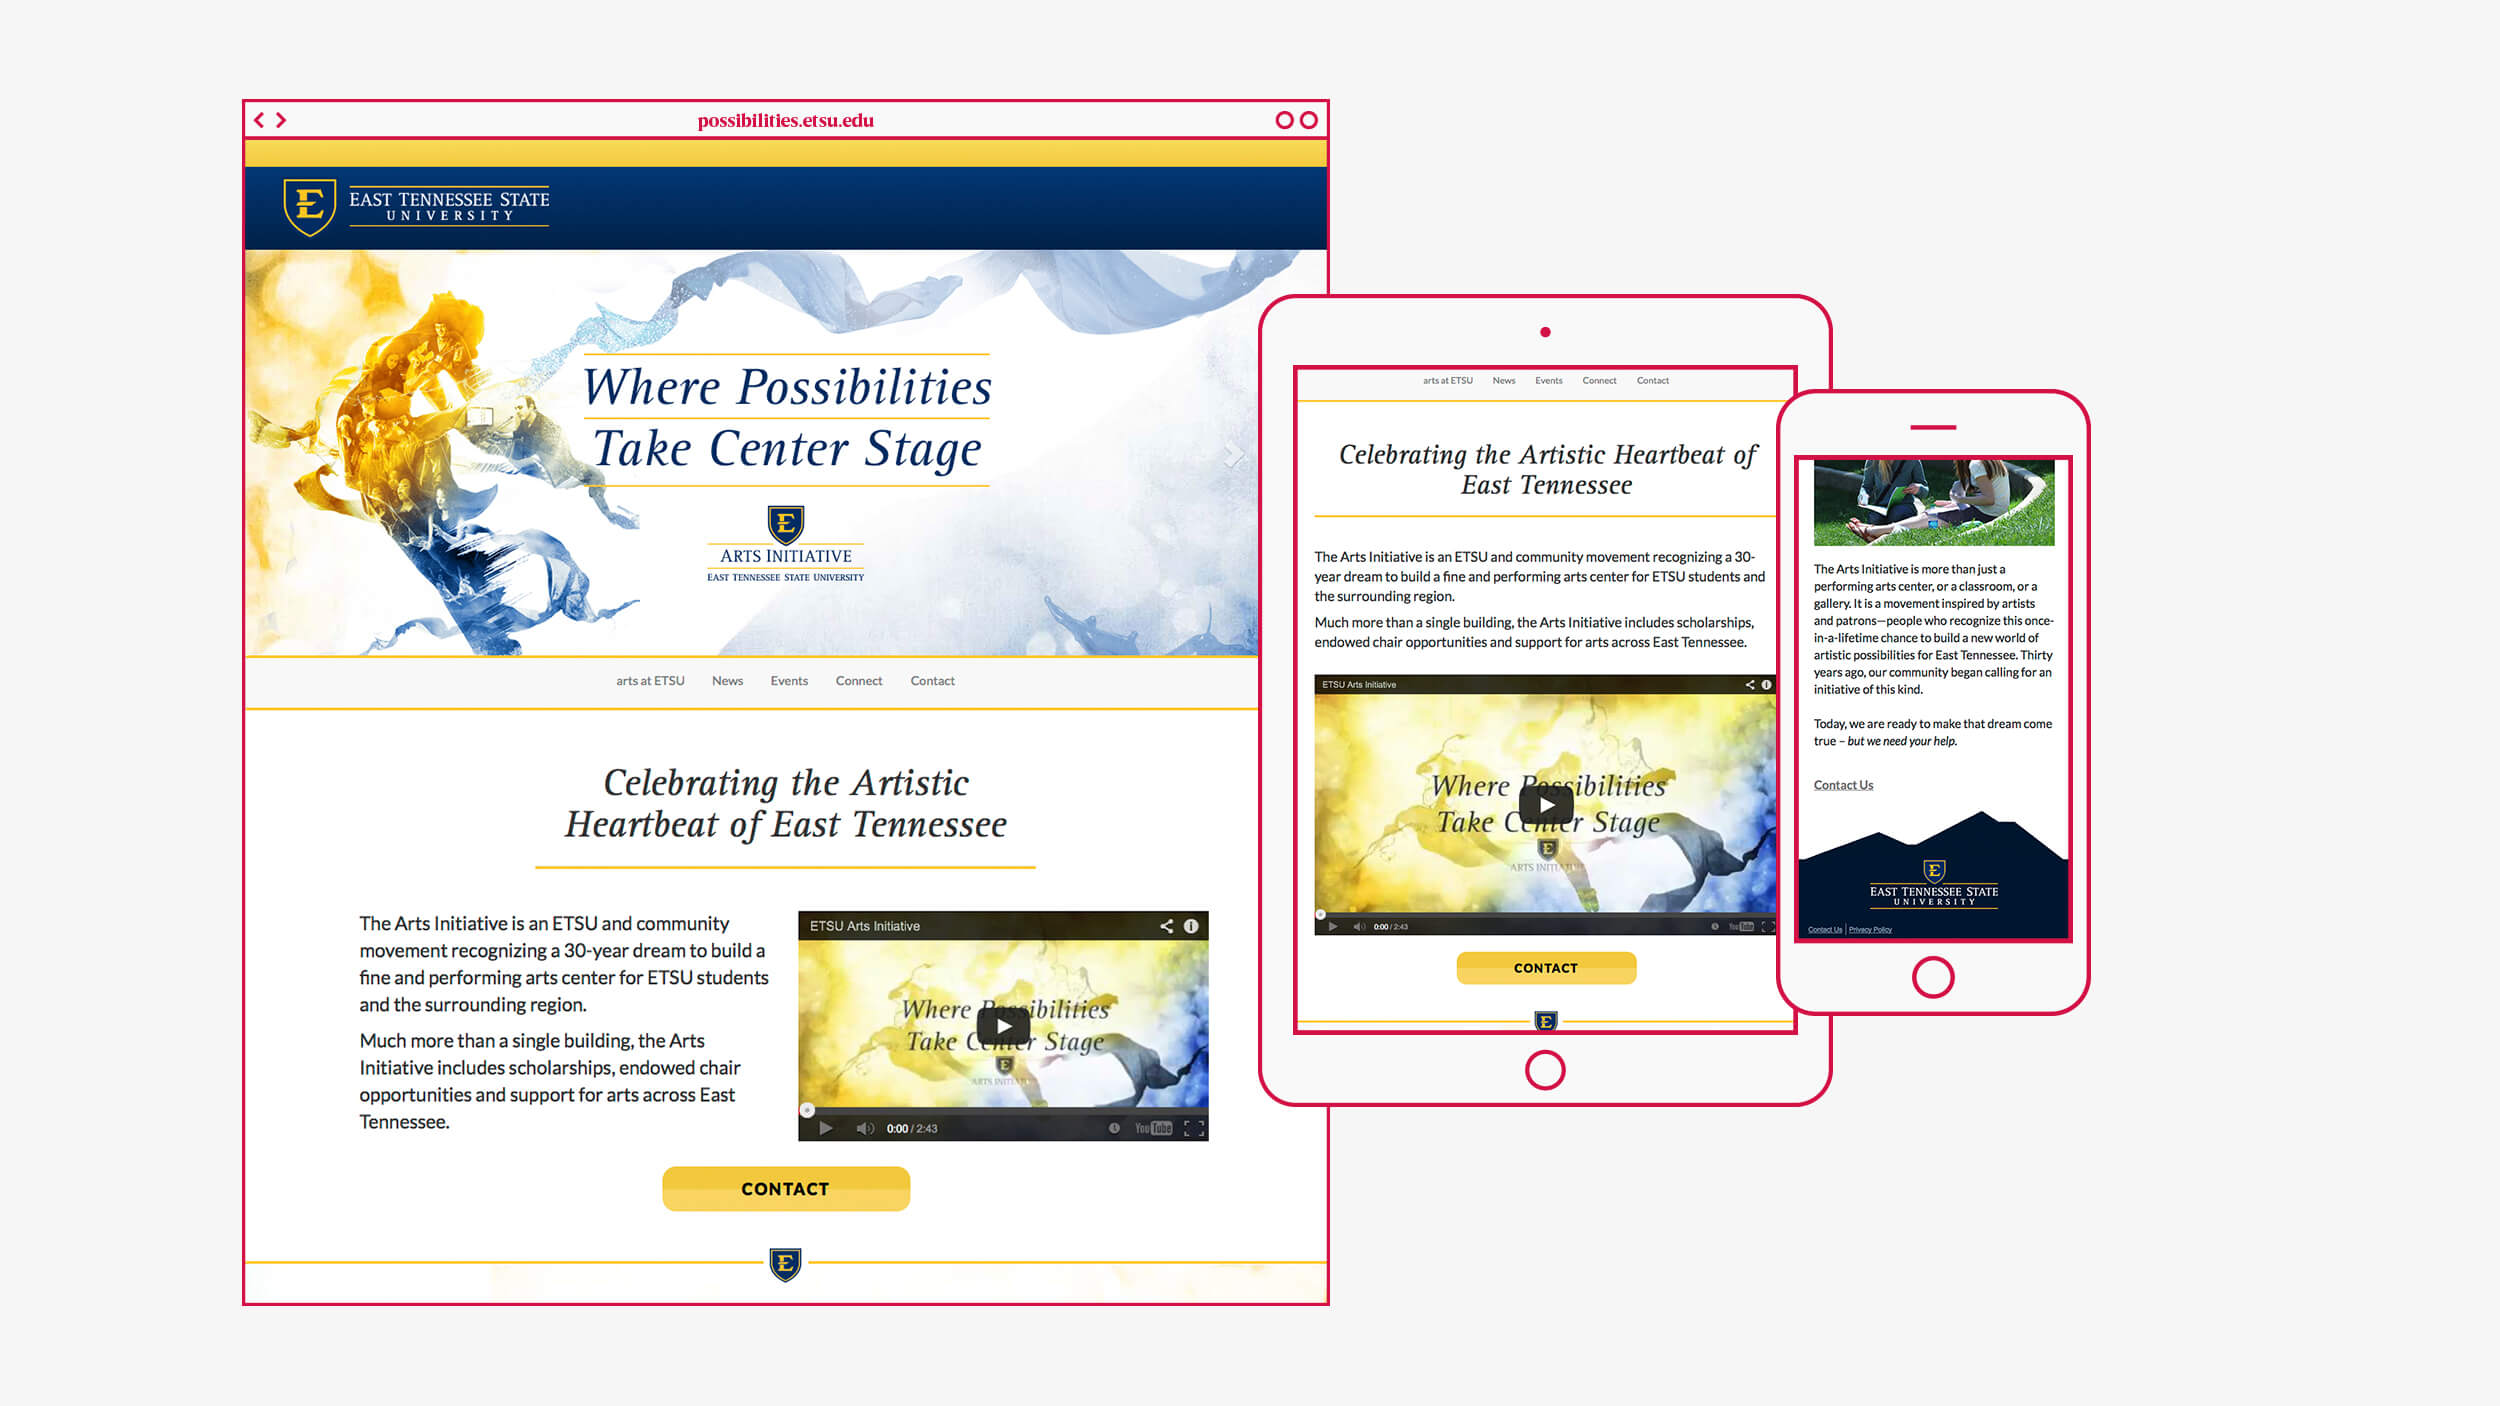 Webpage responsive design for East Tennessee State University Arts Initiative possibilities.etsu.edu